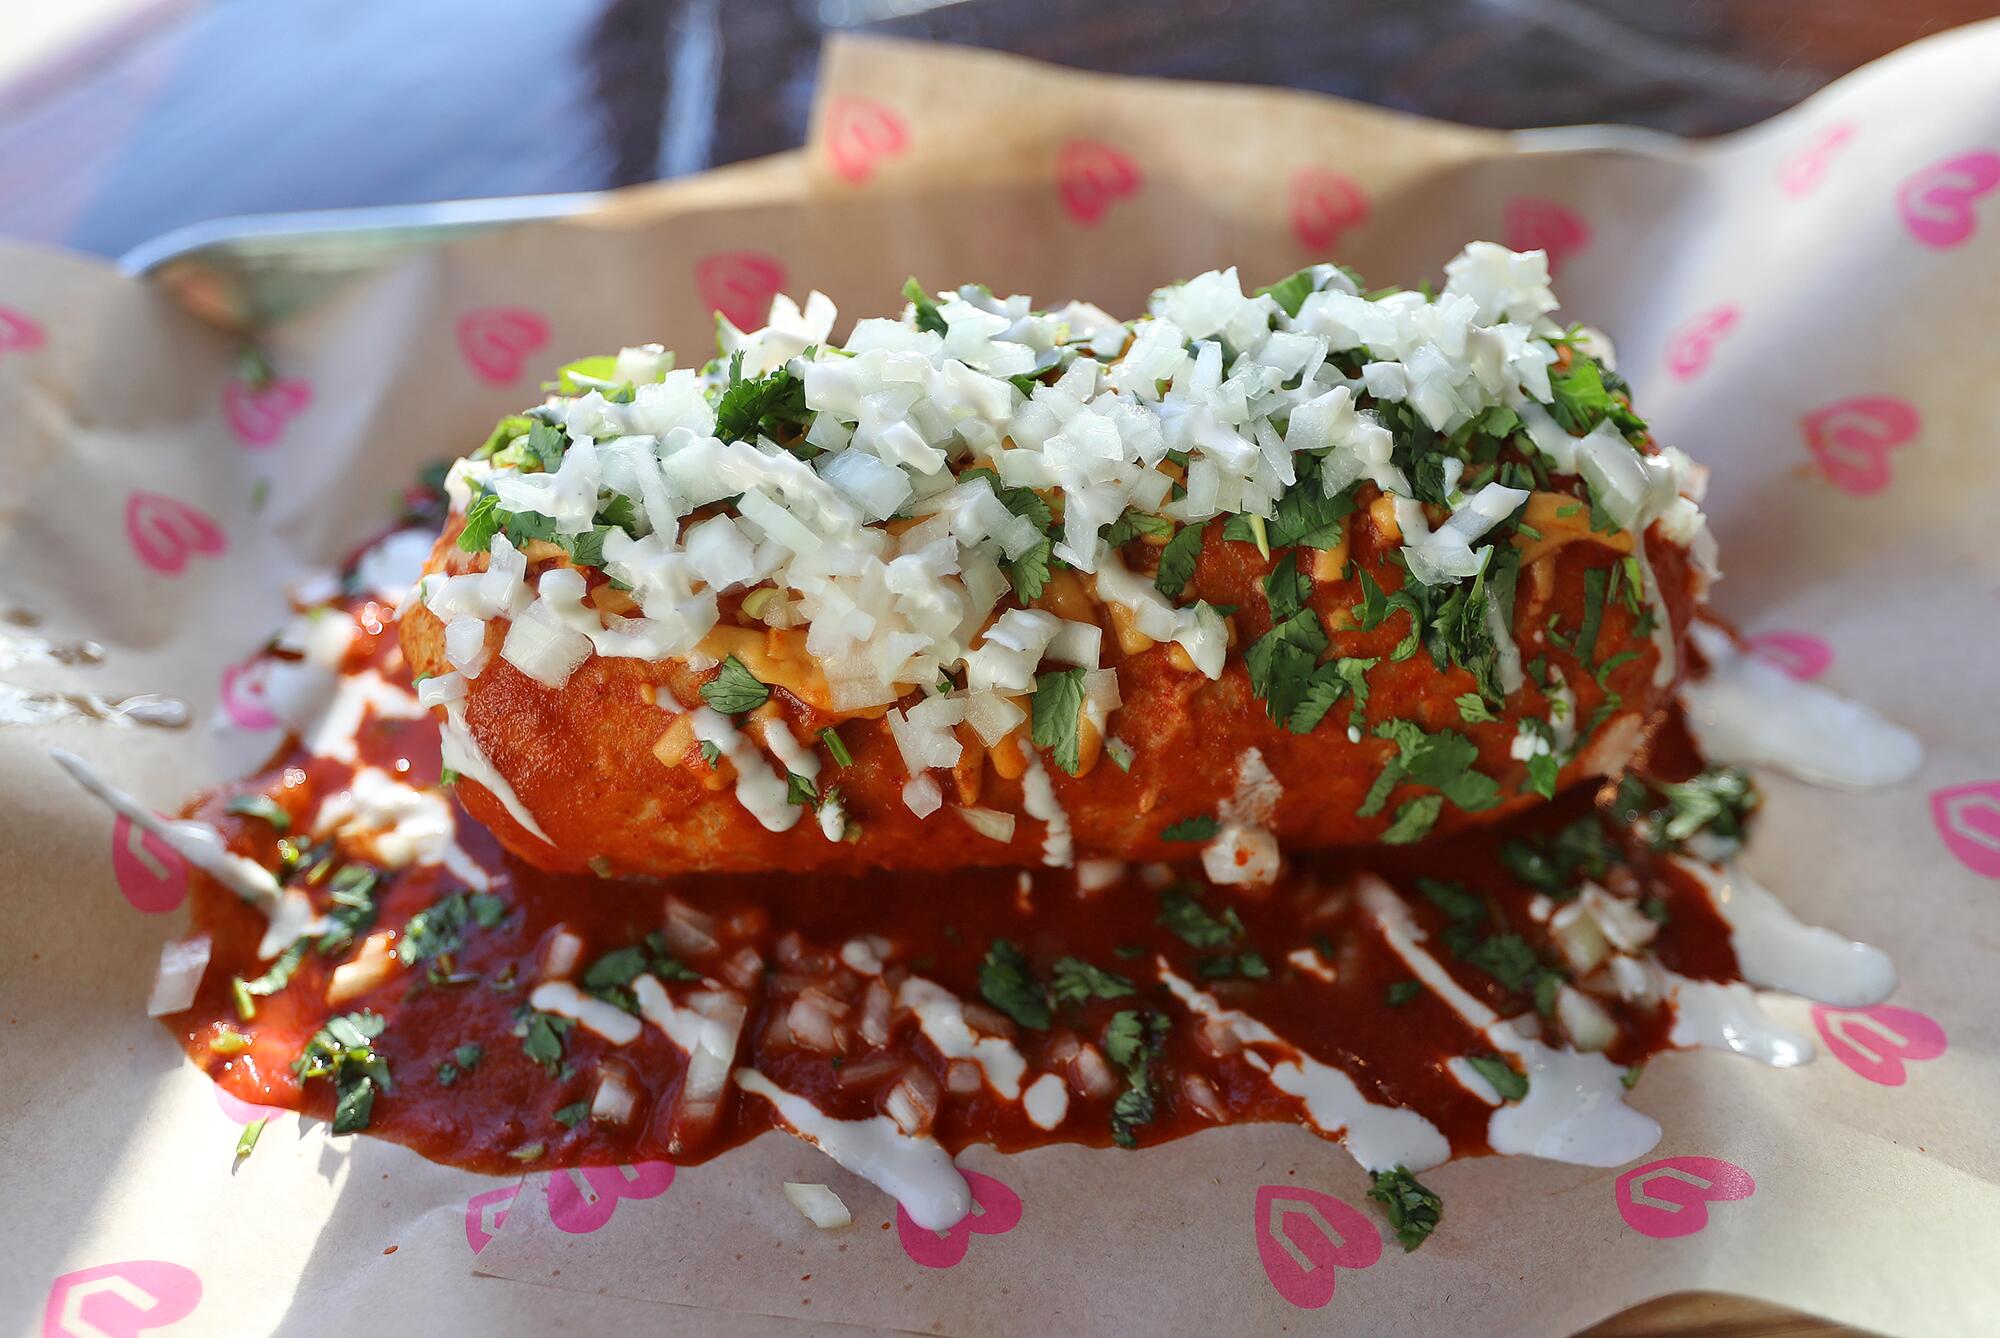 A classico burrito smothered in red sauce at Chicana Plant-based Grub in Fullerton.